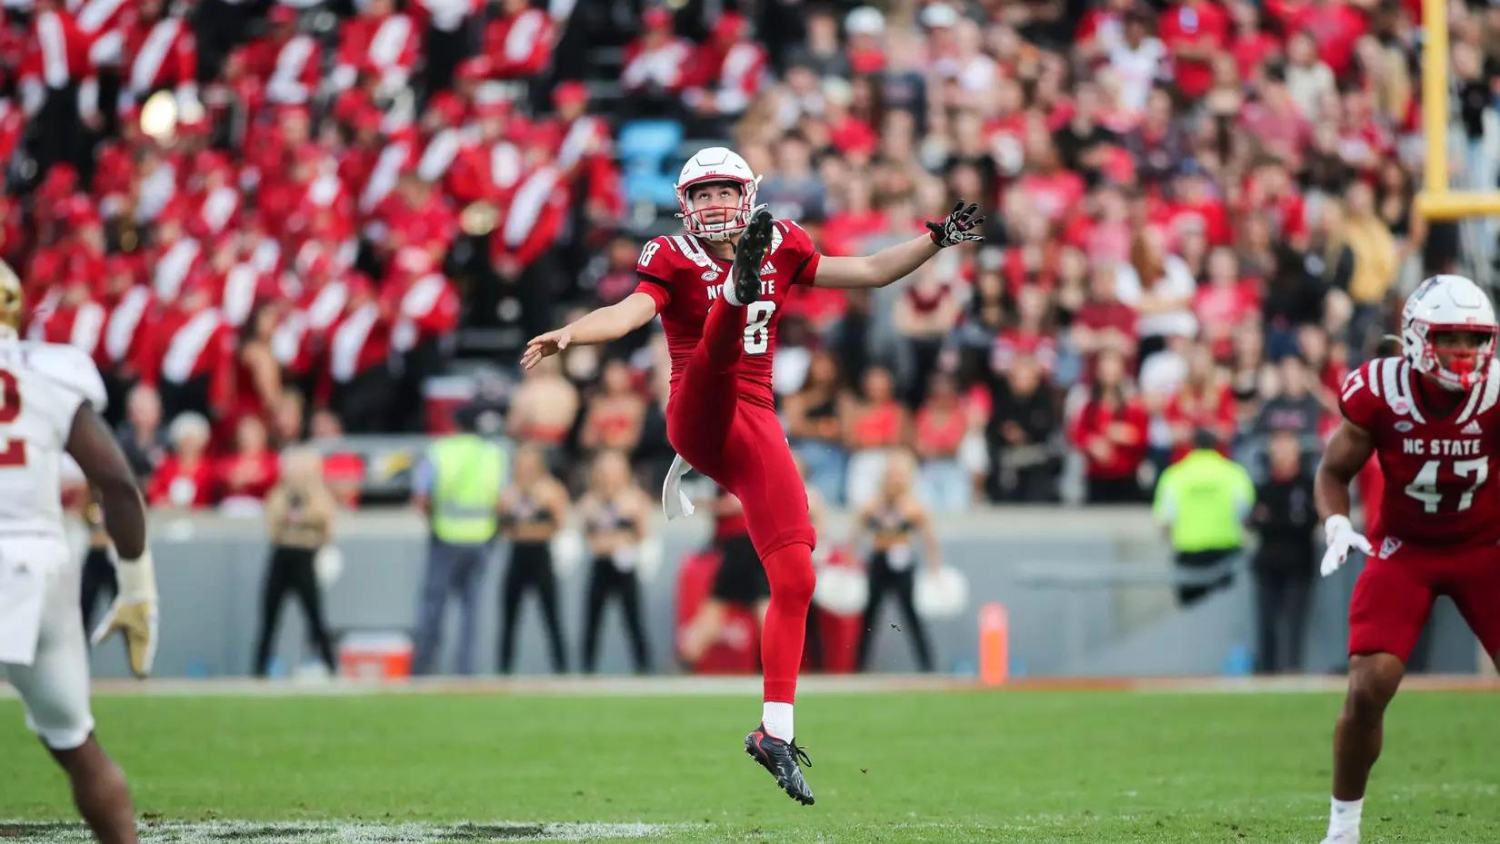 Caden Noonkester kicking a football at Carter-Finley Stadium. Photo by Jed Gammons for NC State Athletics